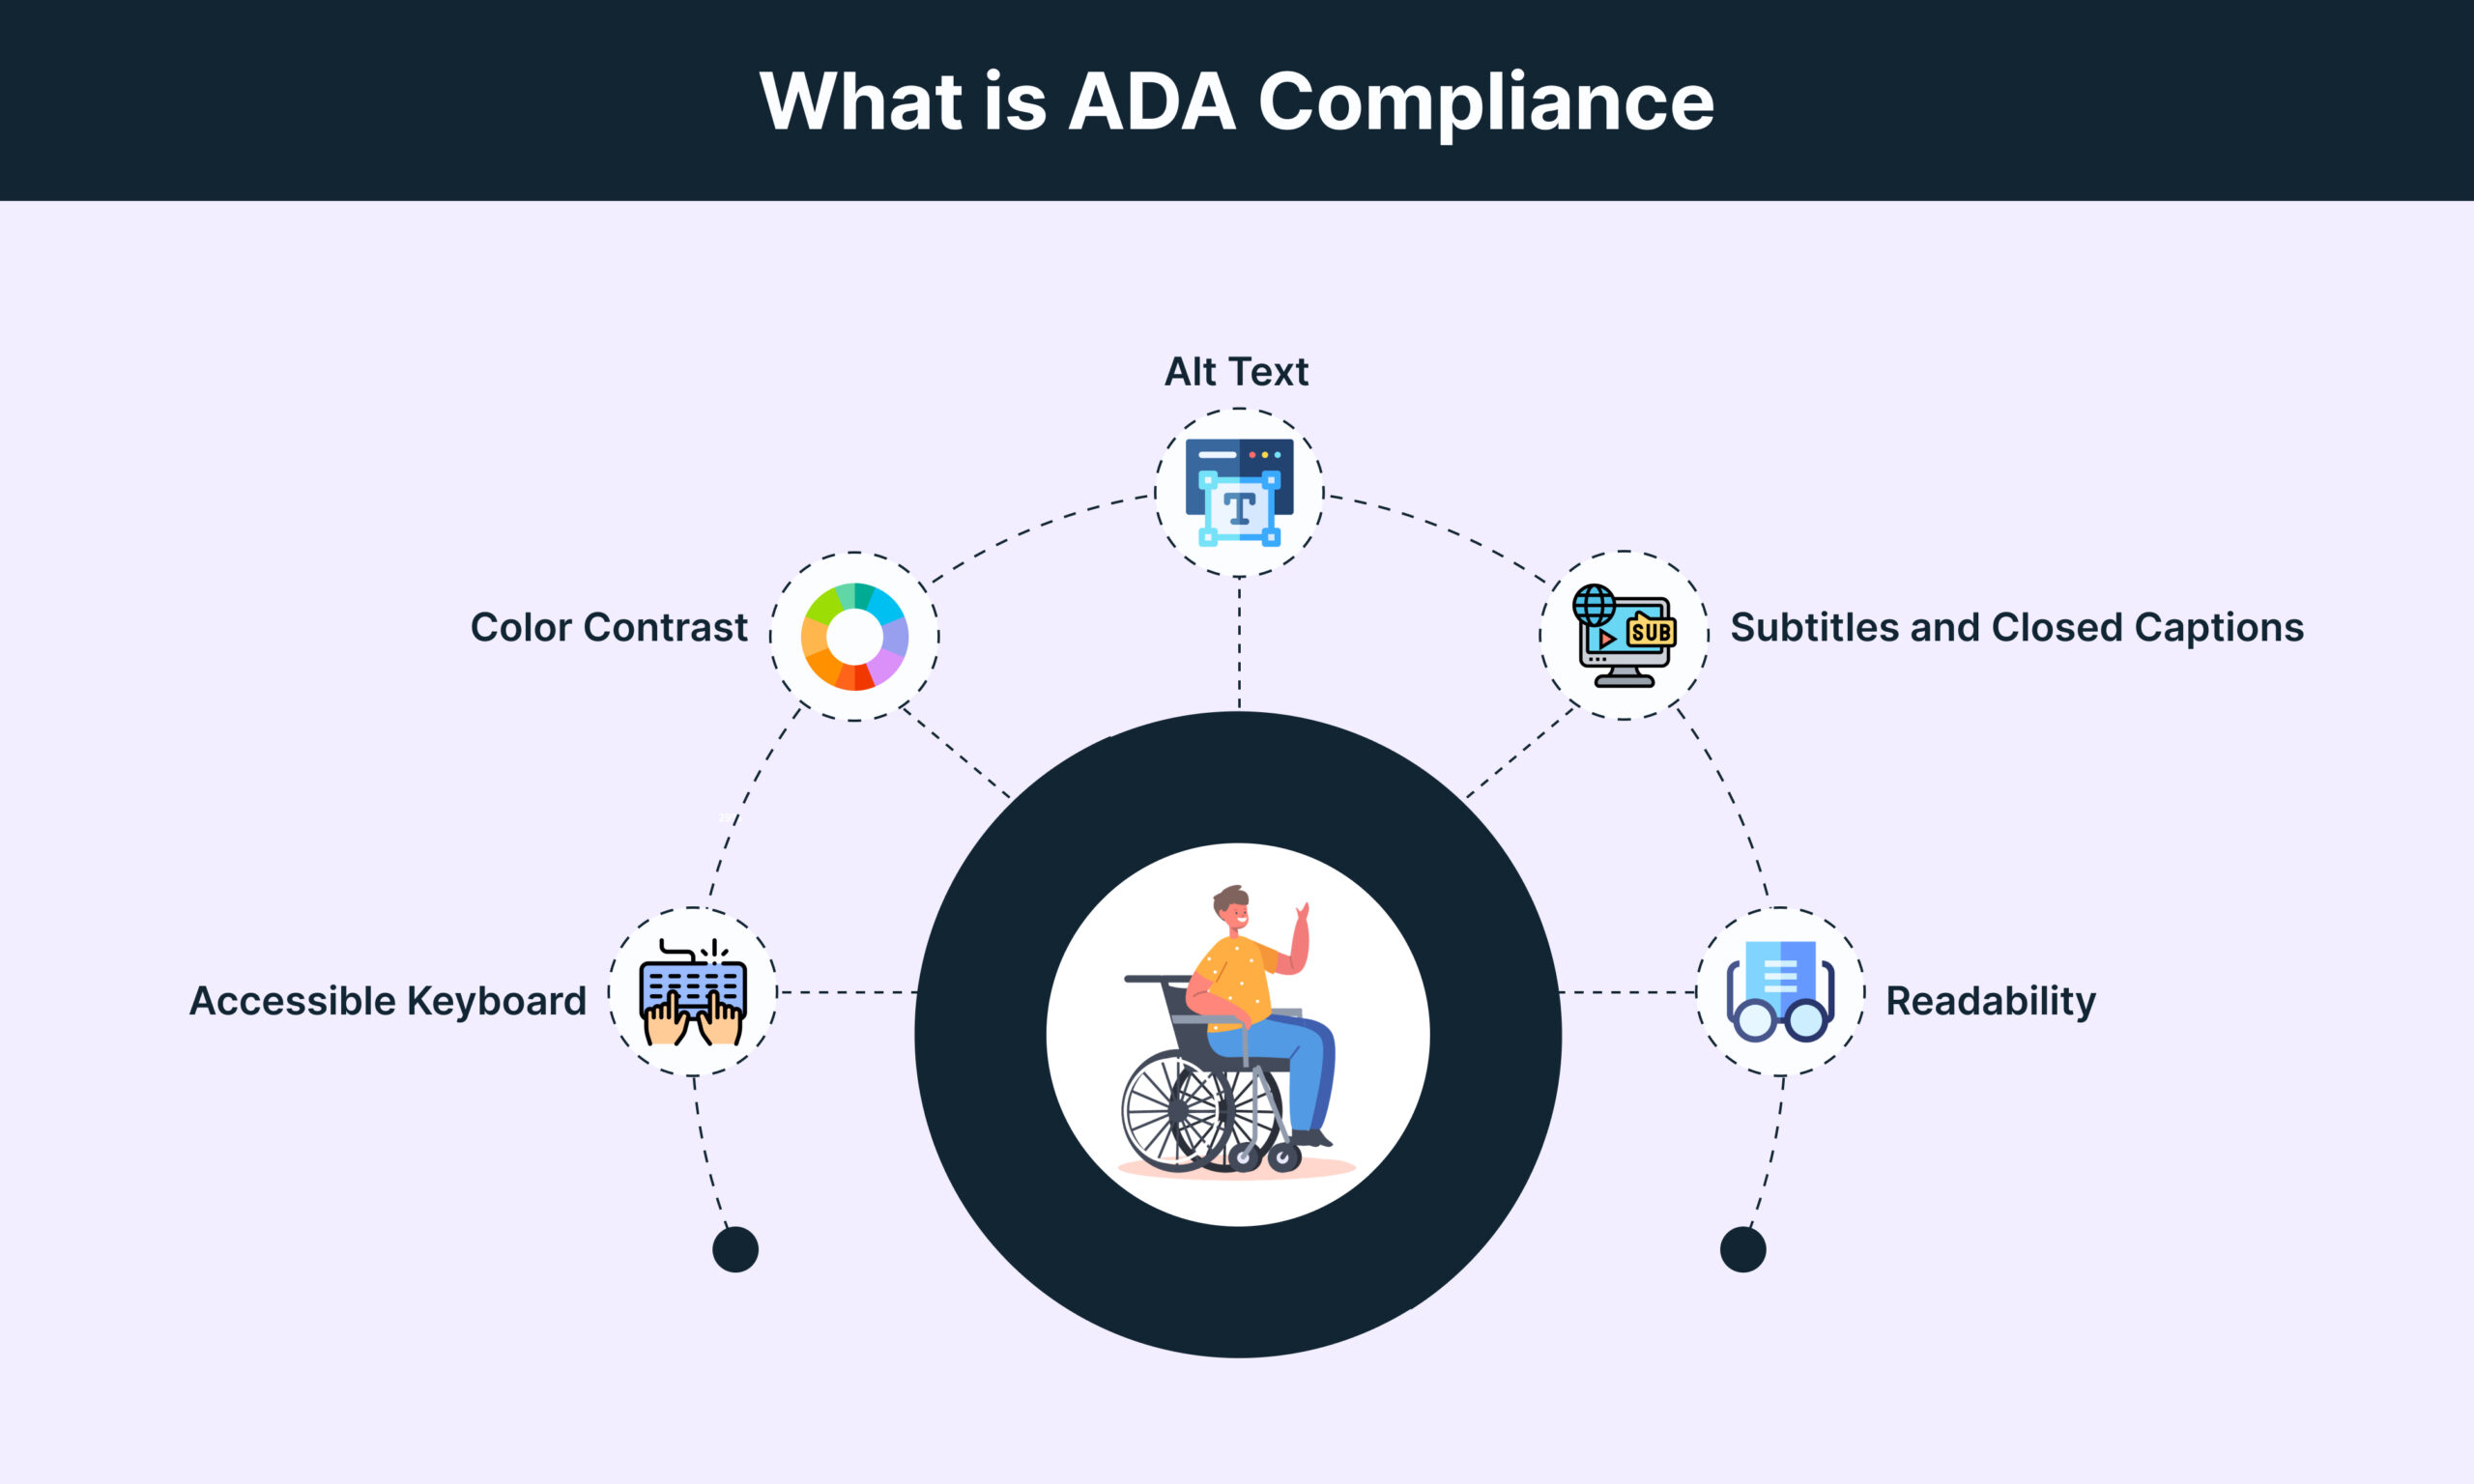 What is ADA Compliance